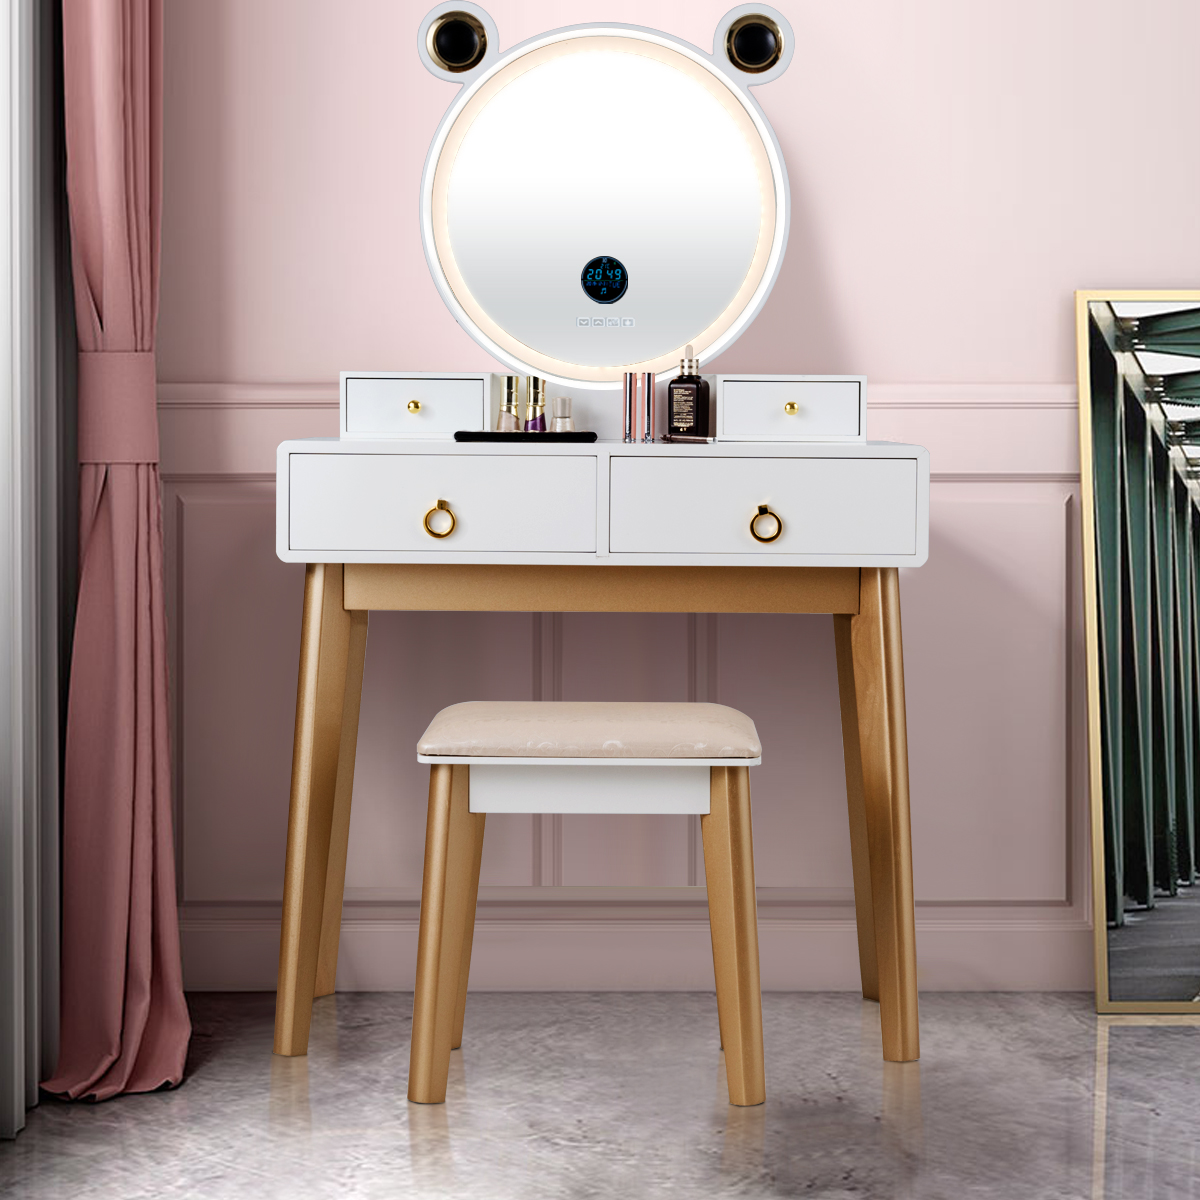 Costway Vanity Dressing Table Set Touch Screen Dimming Mirror - image 2 of 10